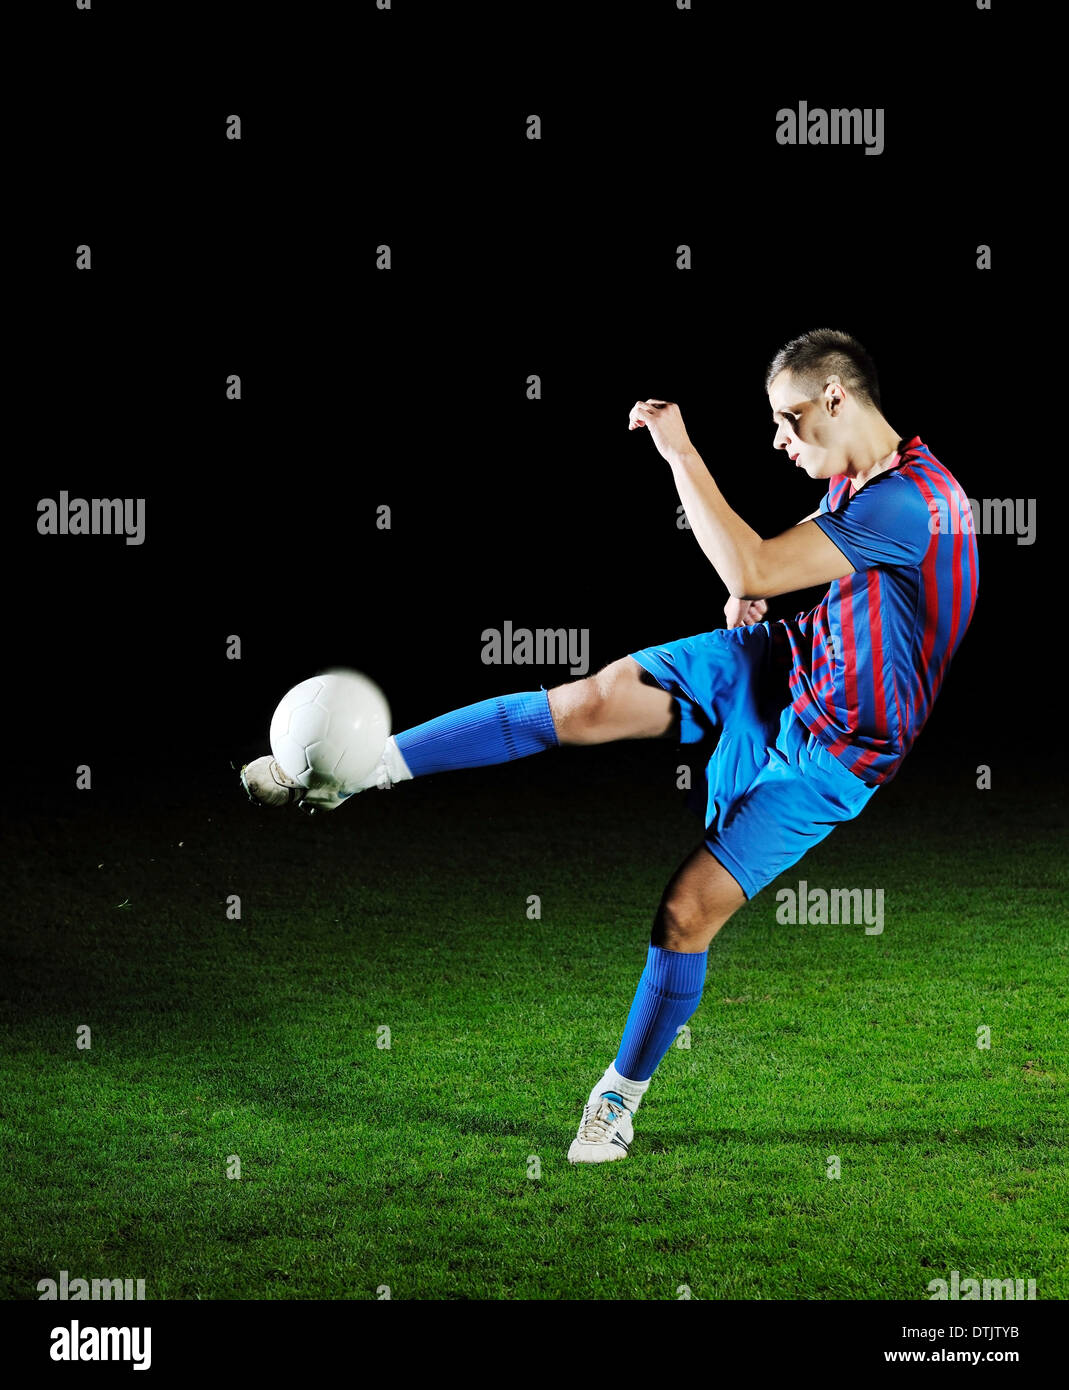 football player in action Stock Photo